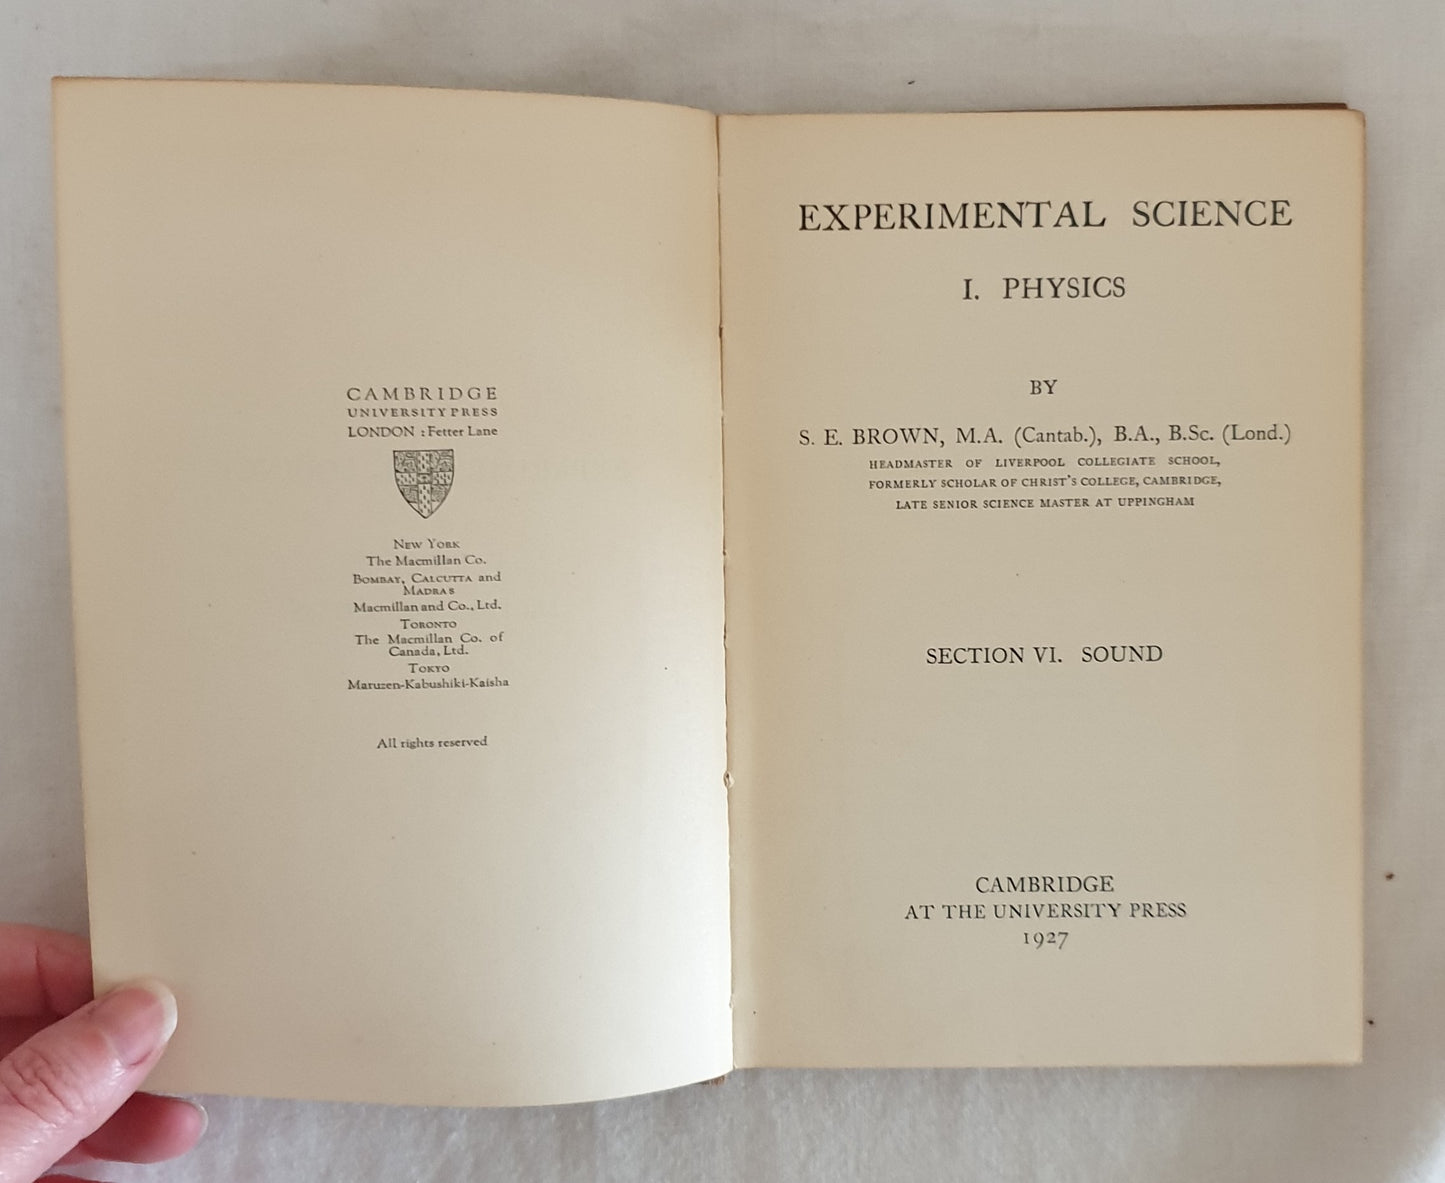 Experimental Science I. Physics - Sound by S. E. Brown